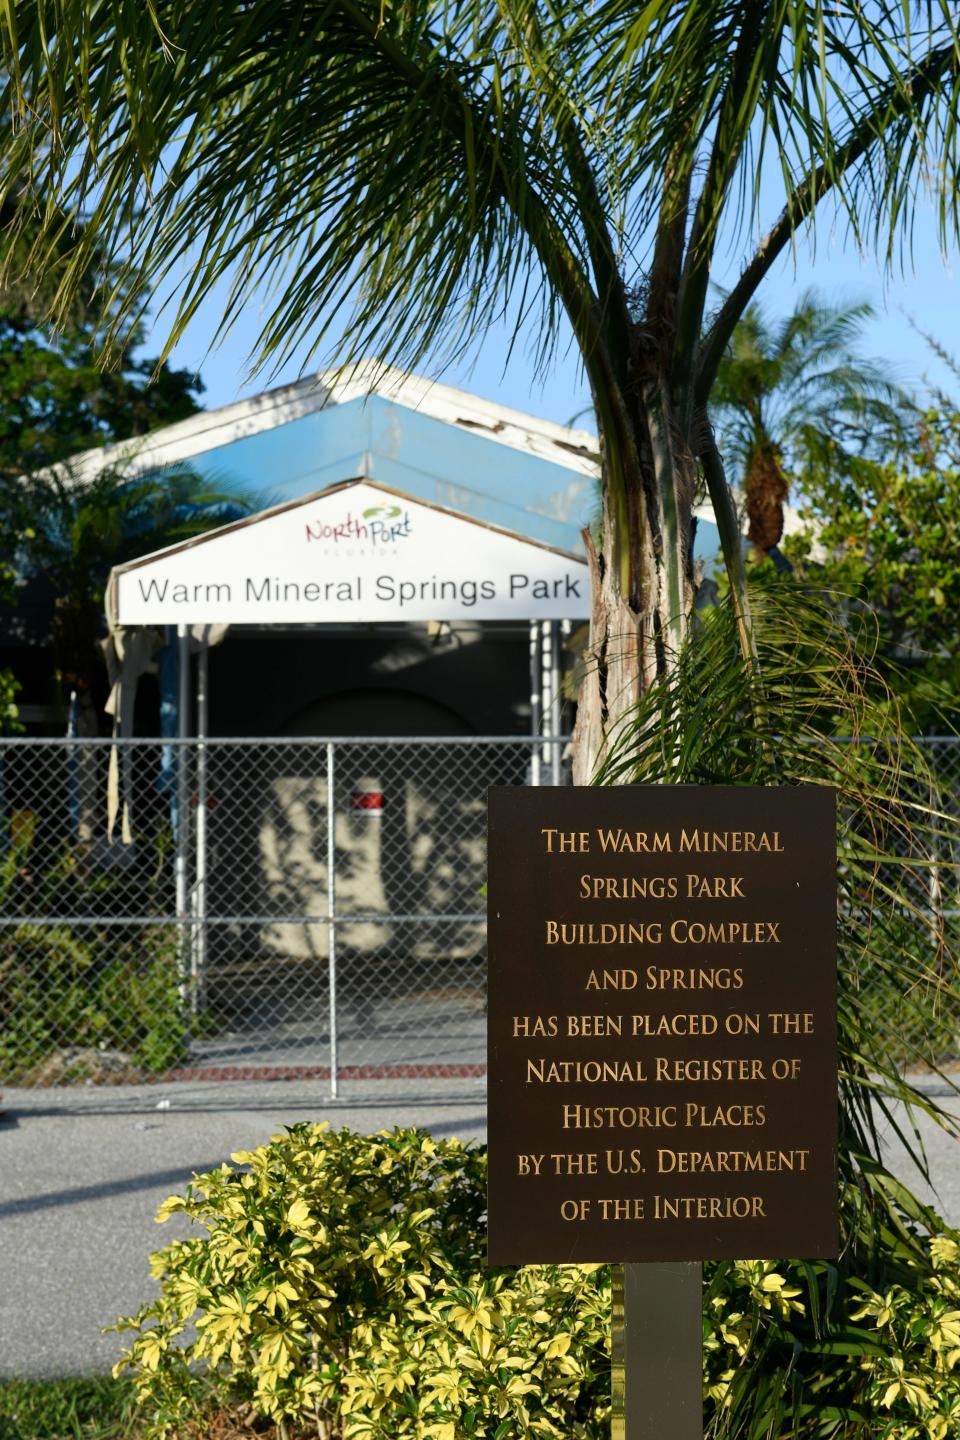 Warm Mineral Springs Park located in North Port, has been placed on the National Registry of historic places by the U.S. Department of the Interior. THOMAS BENDER/HERALD-TRIBUNE